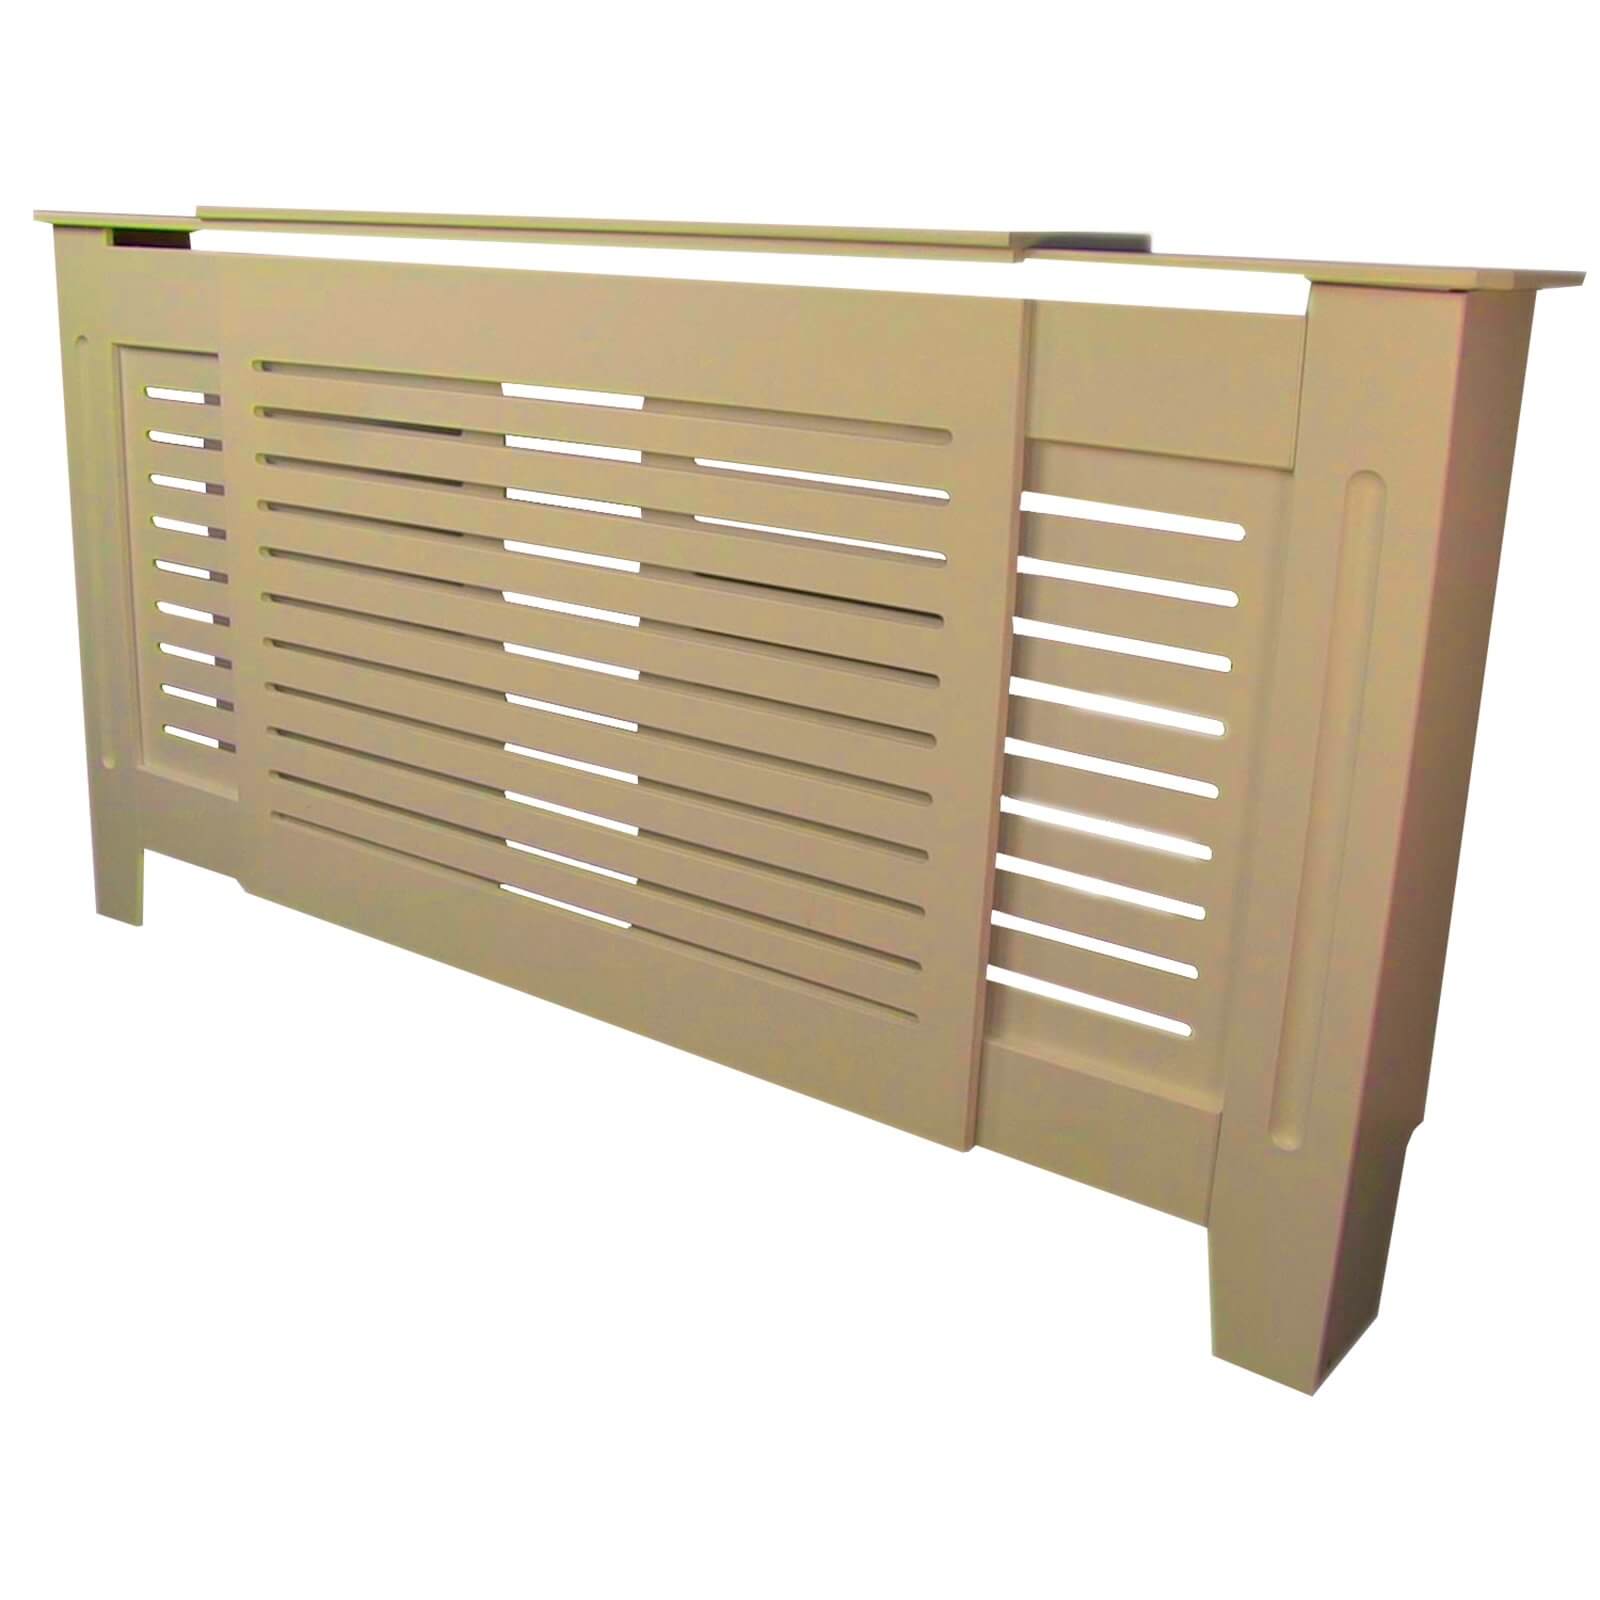 Radiator Cover with Horizontal Slatted Design in Unpainted - Adjustable